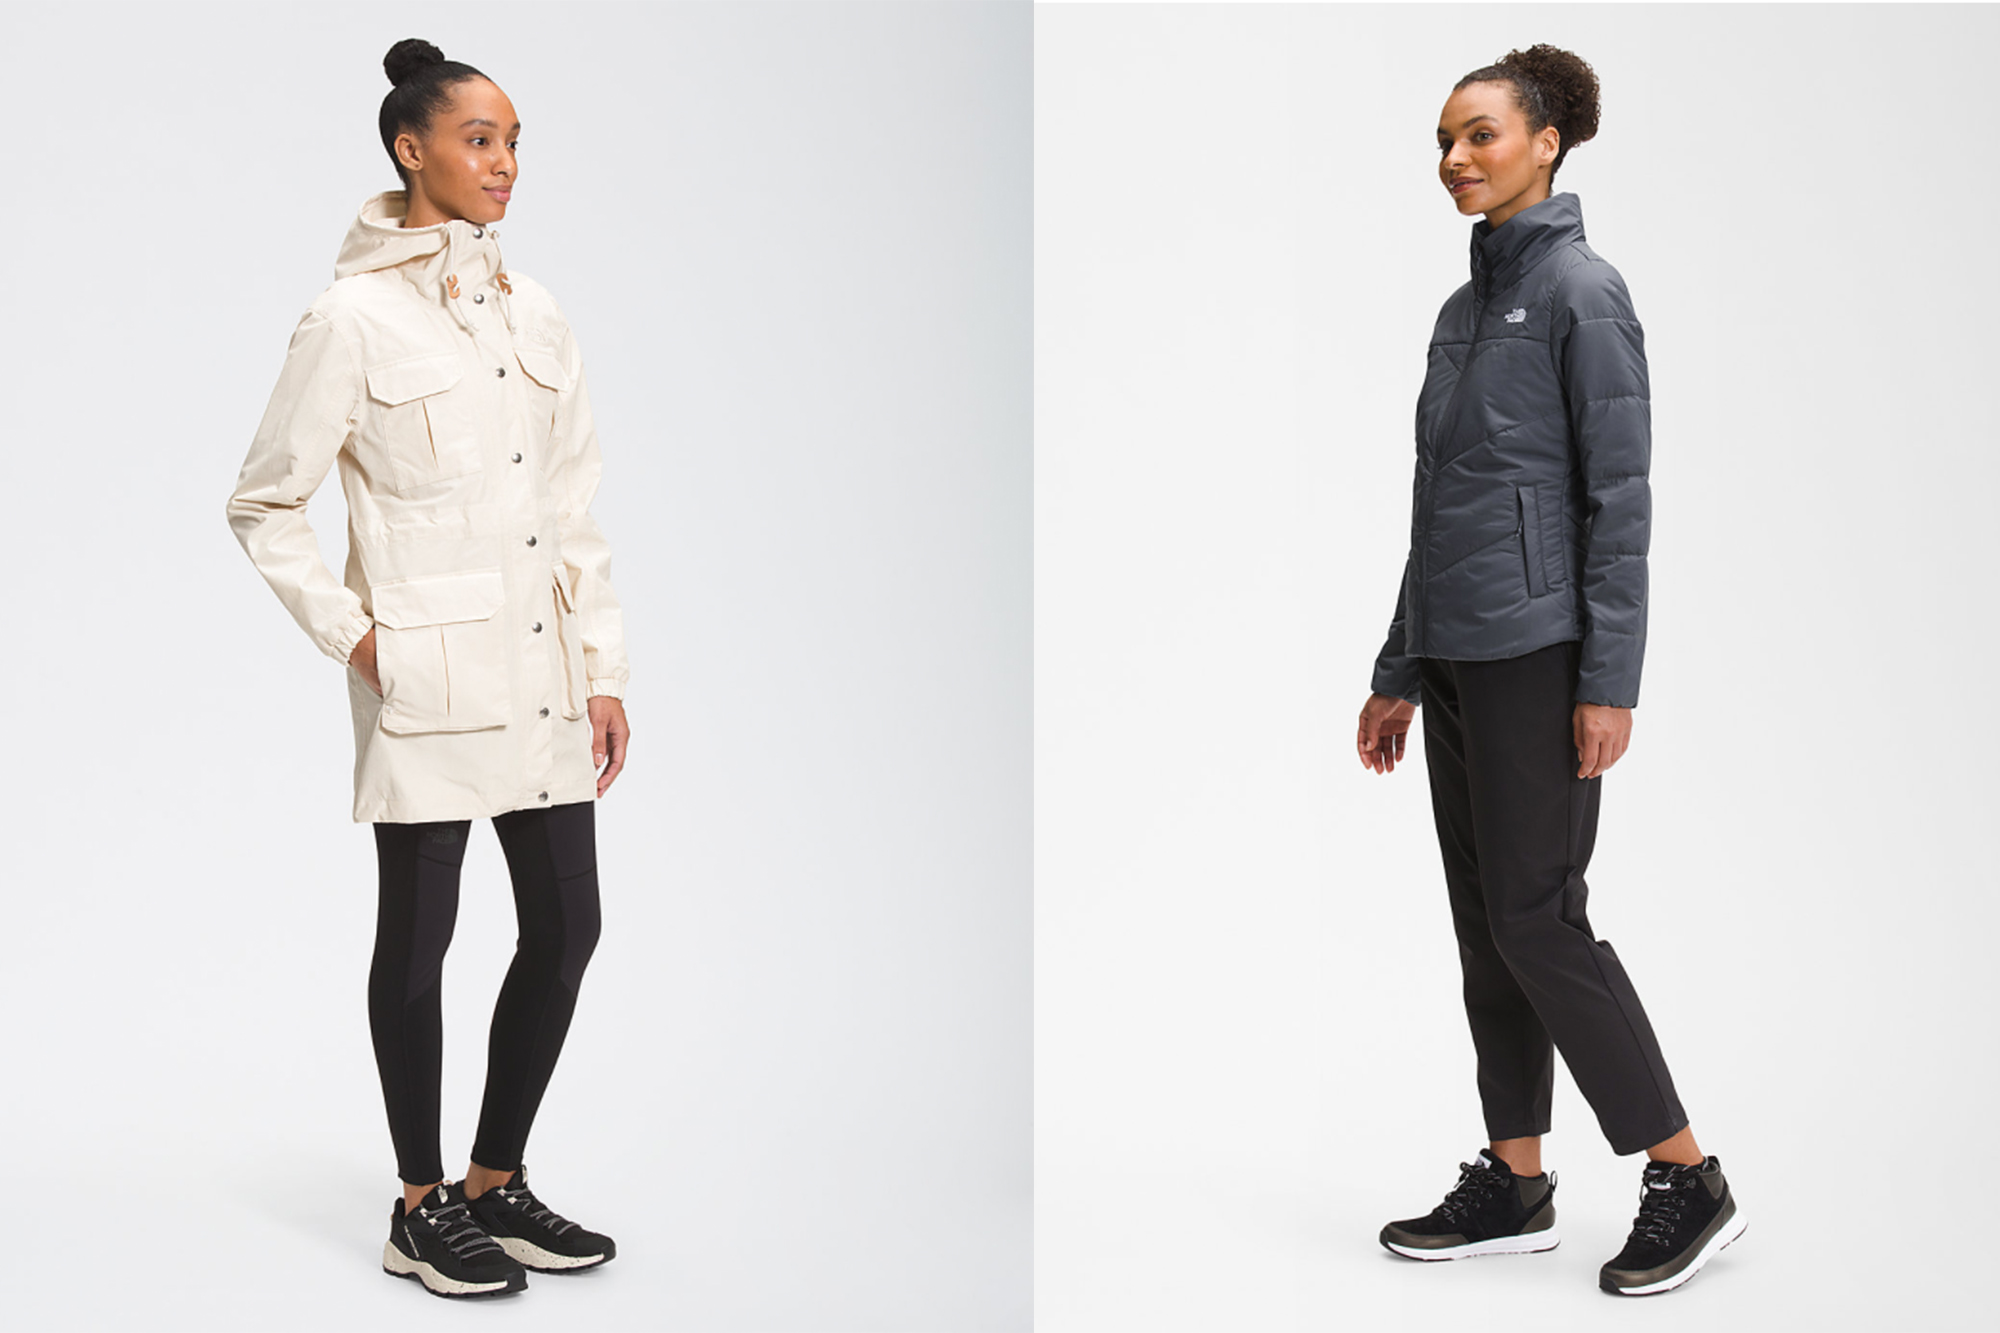 The North Face Black Friday Jacket Deals To Shop Now — 40